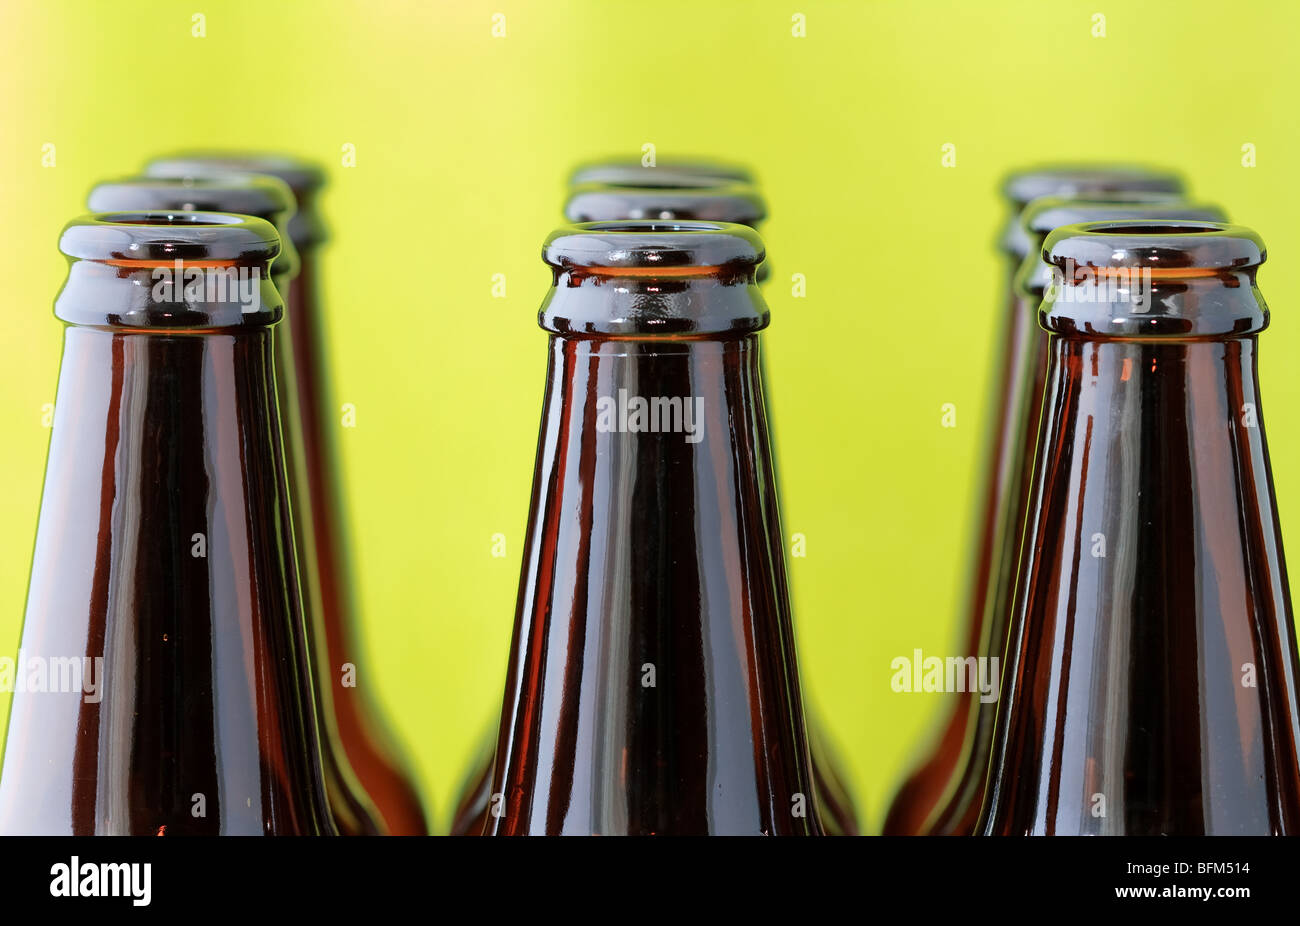 Empty beer bottles in rows in front of a bright green background Stock Photo